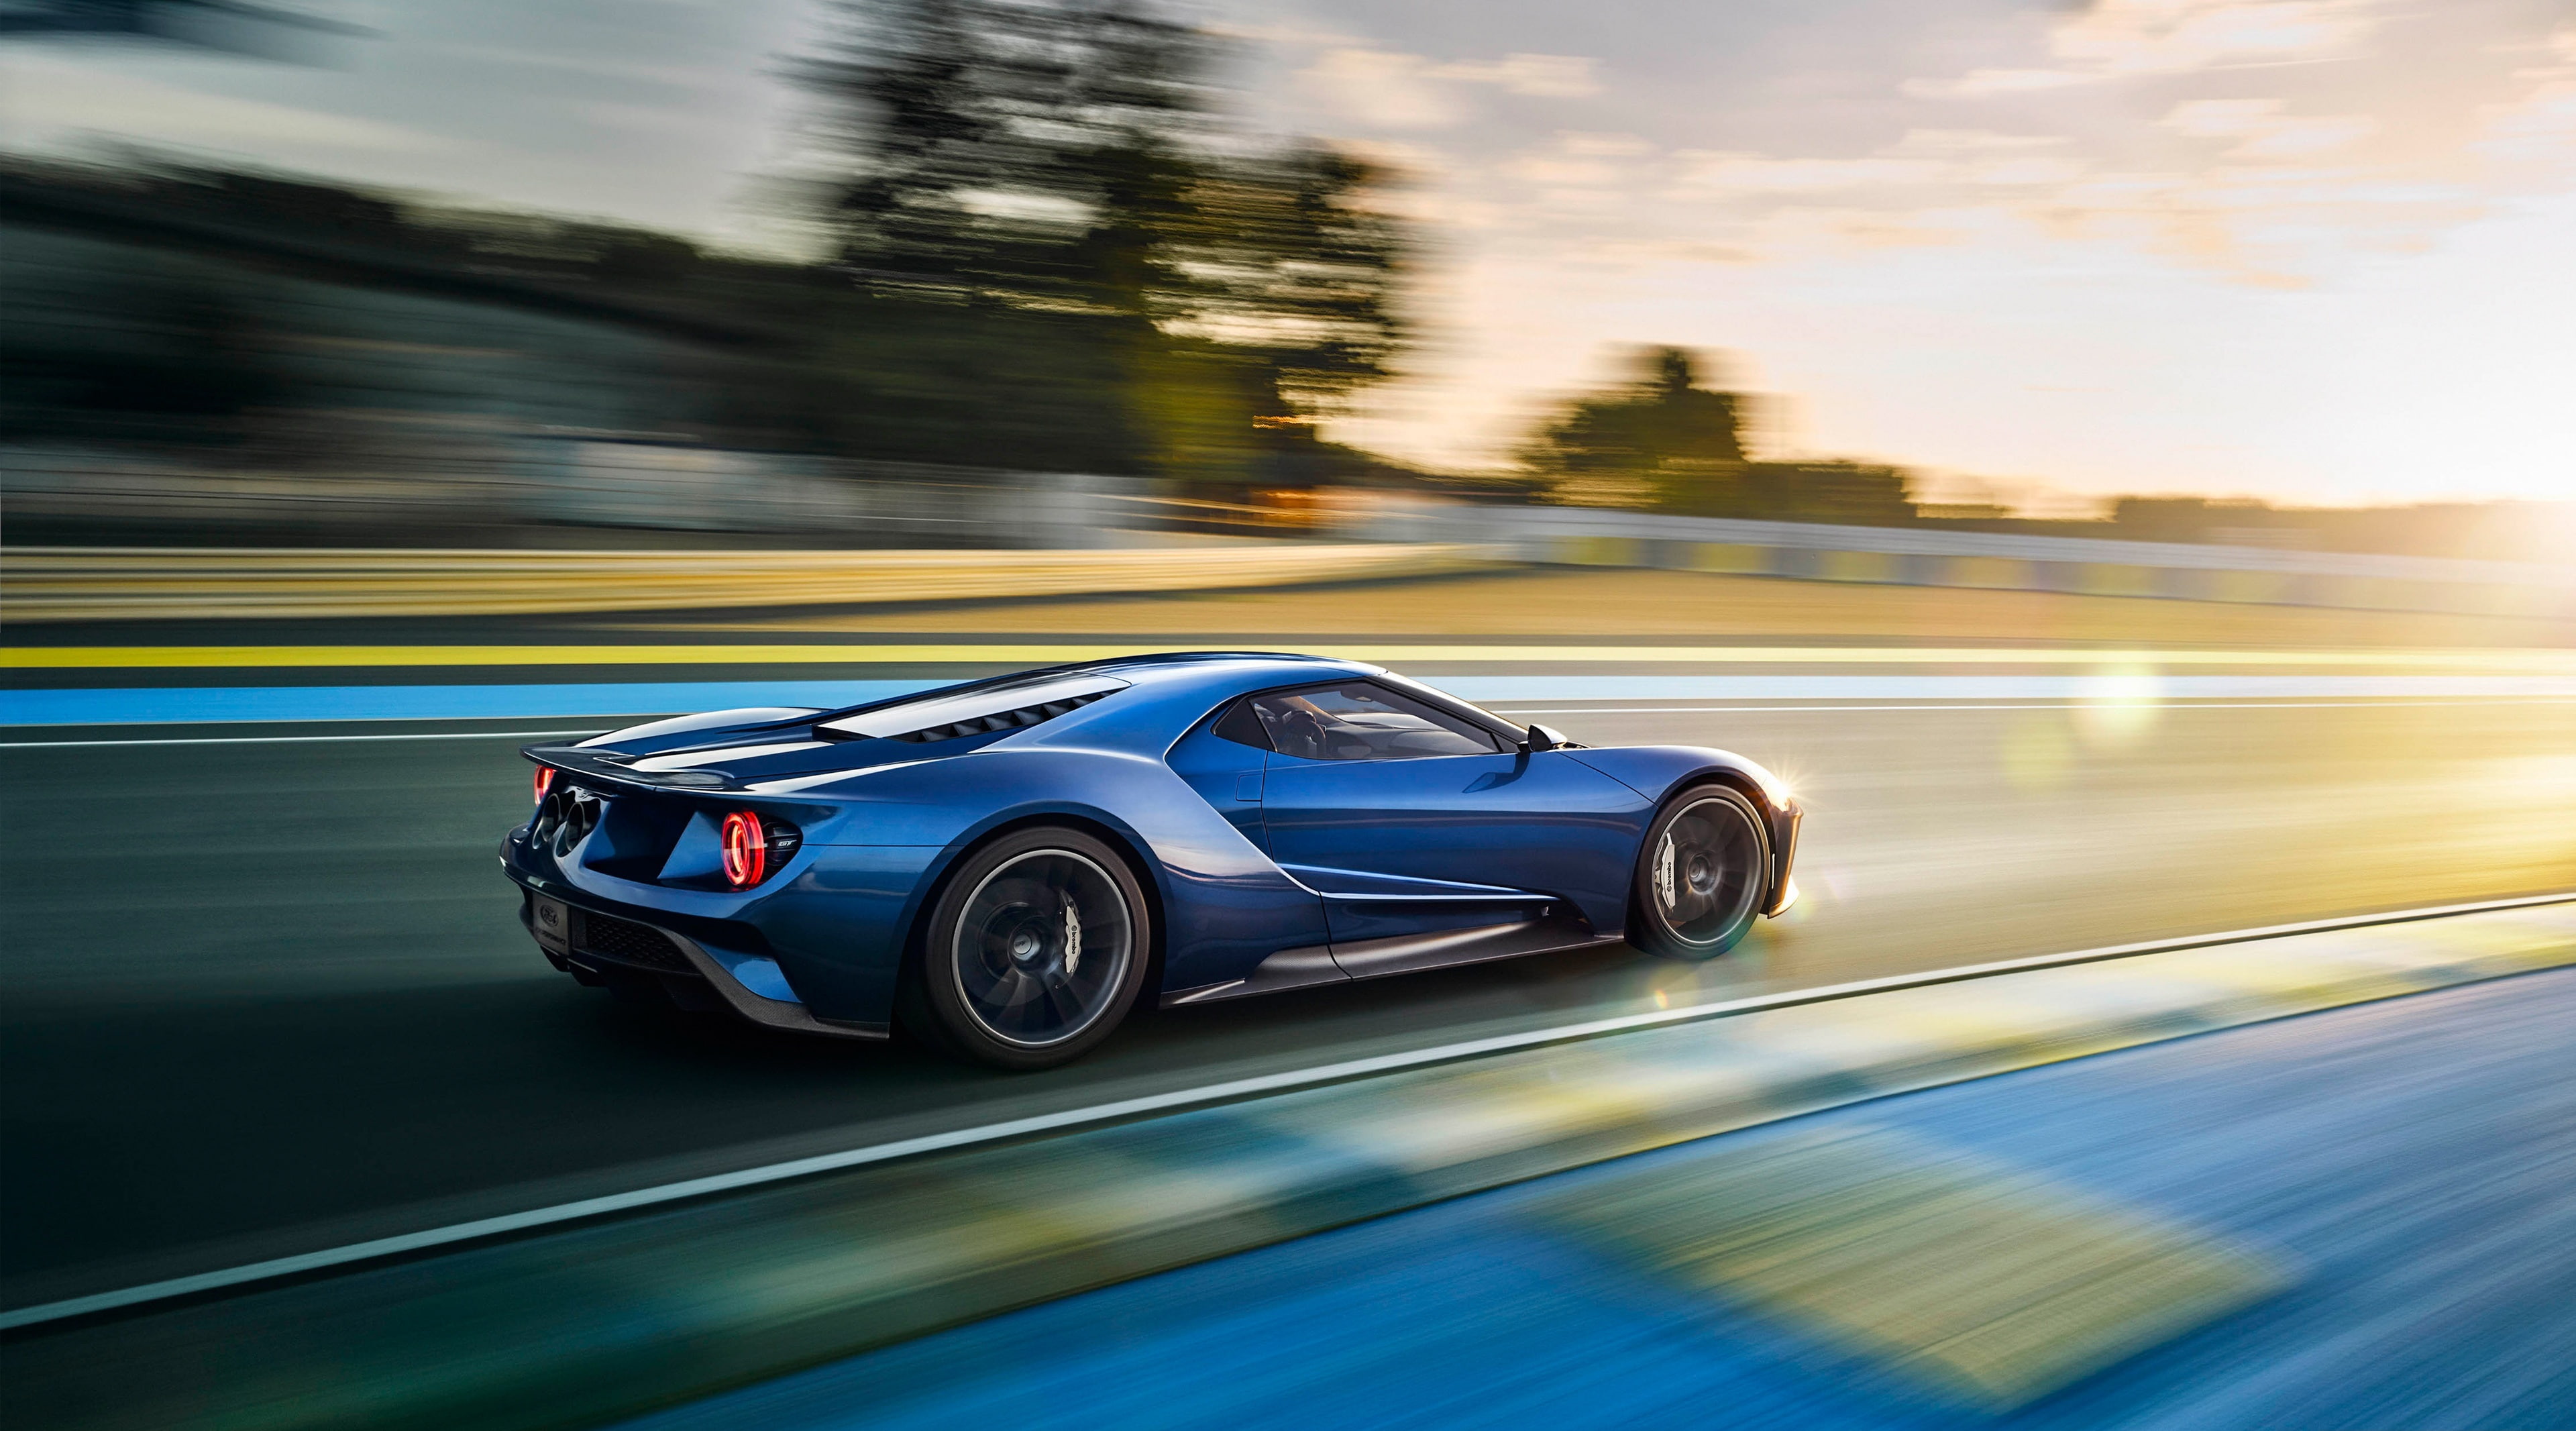 2017 Ford GT, black coupe, Cars, motion, blurred motion, mode of transportation